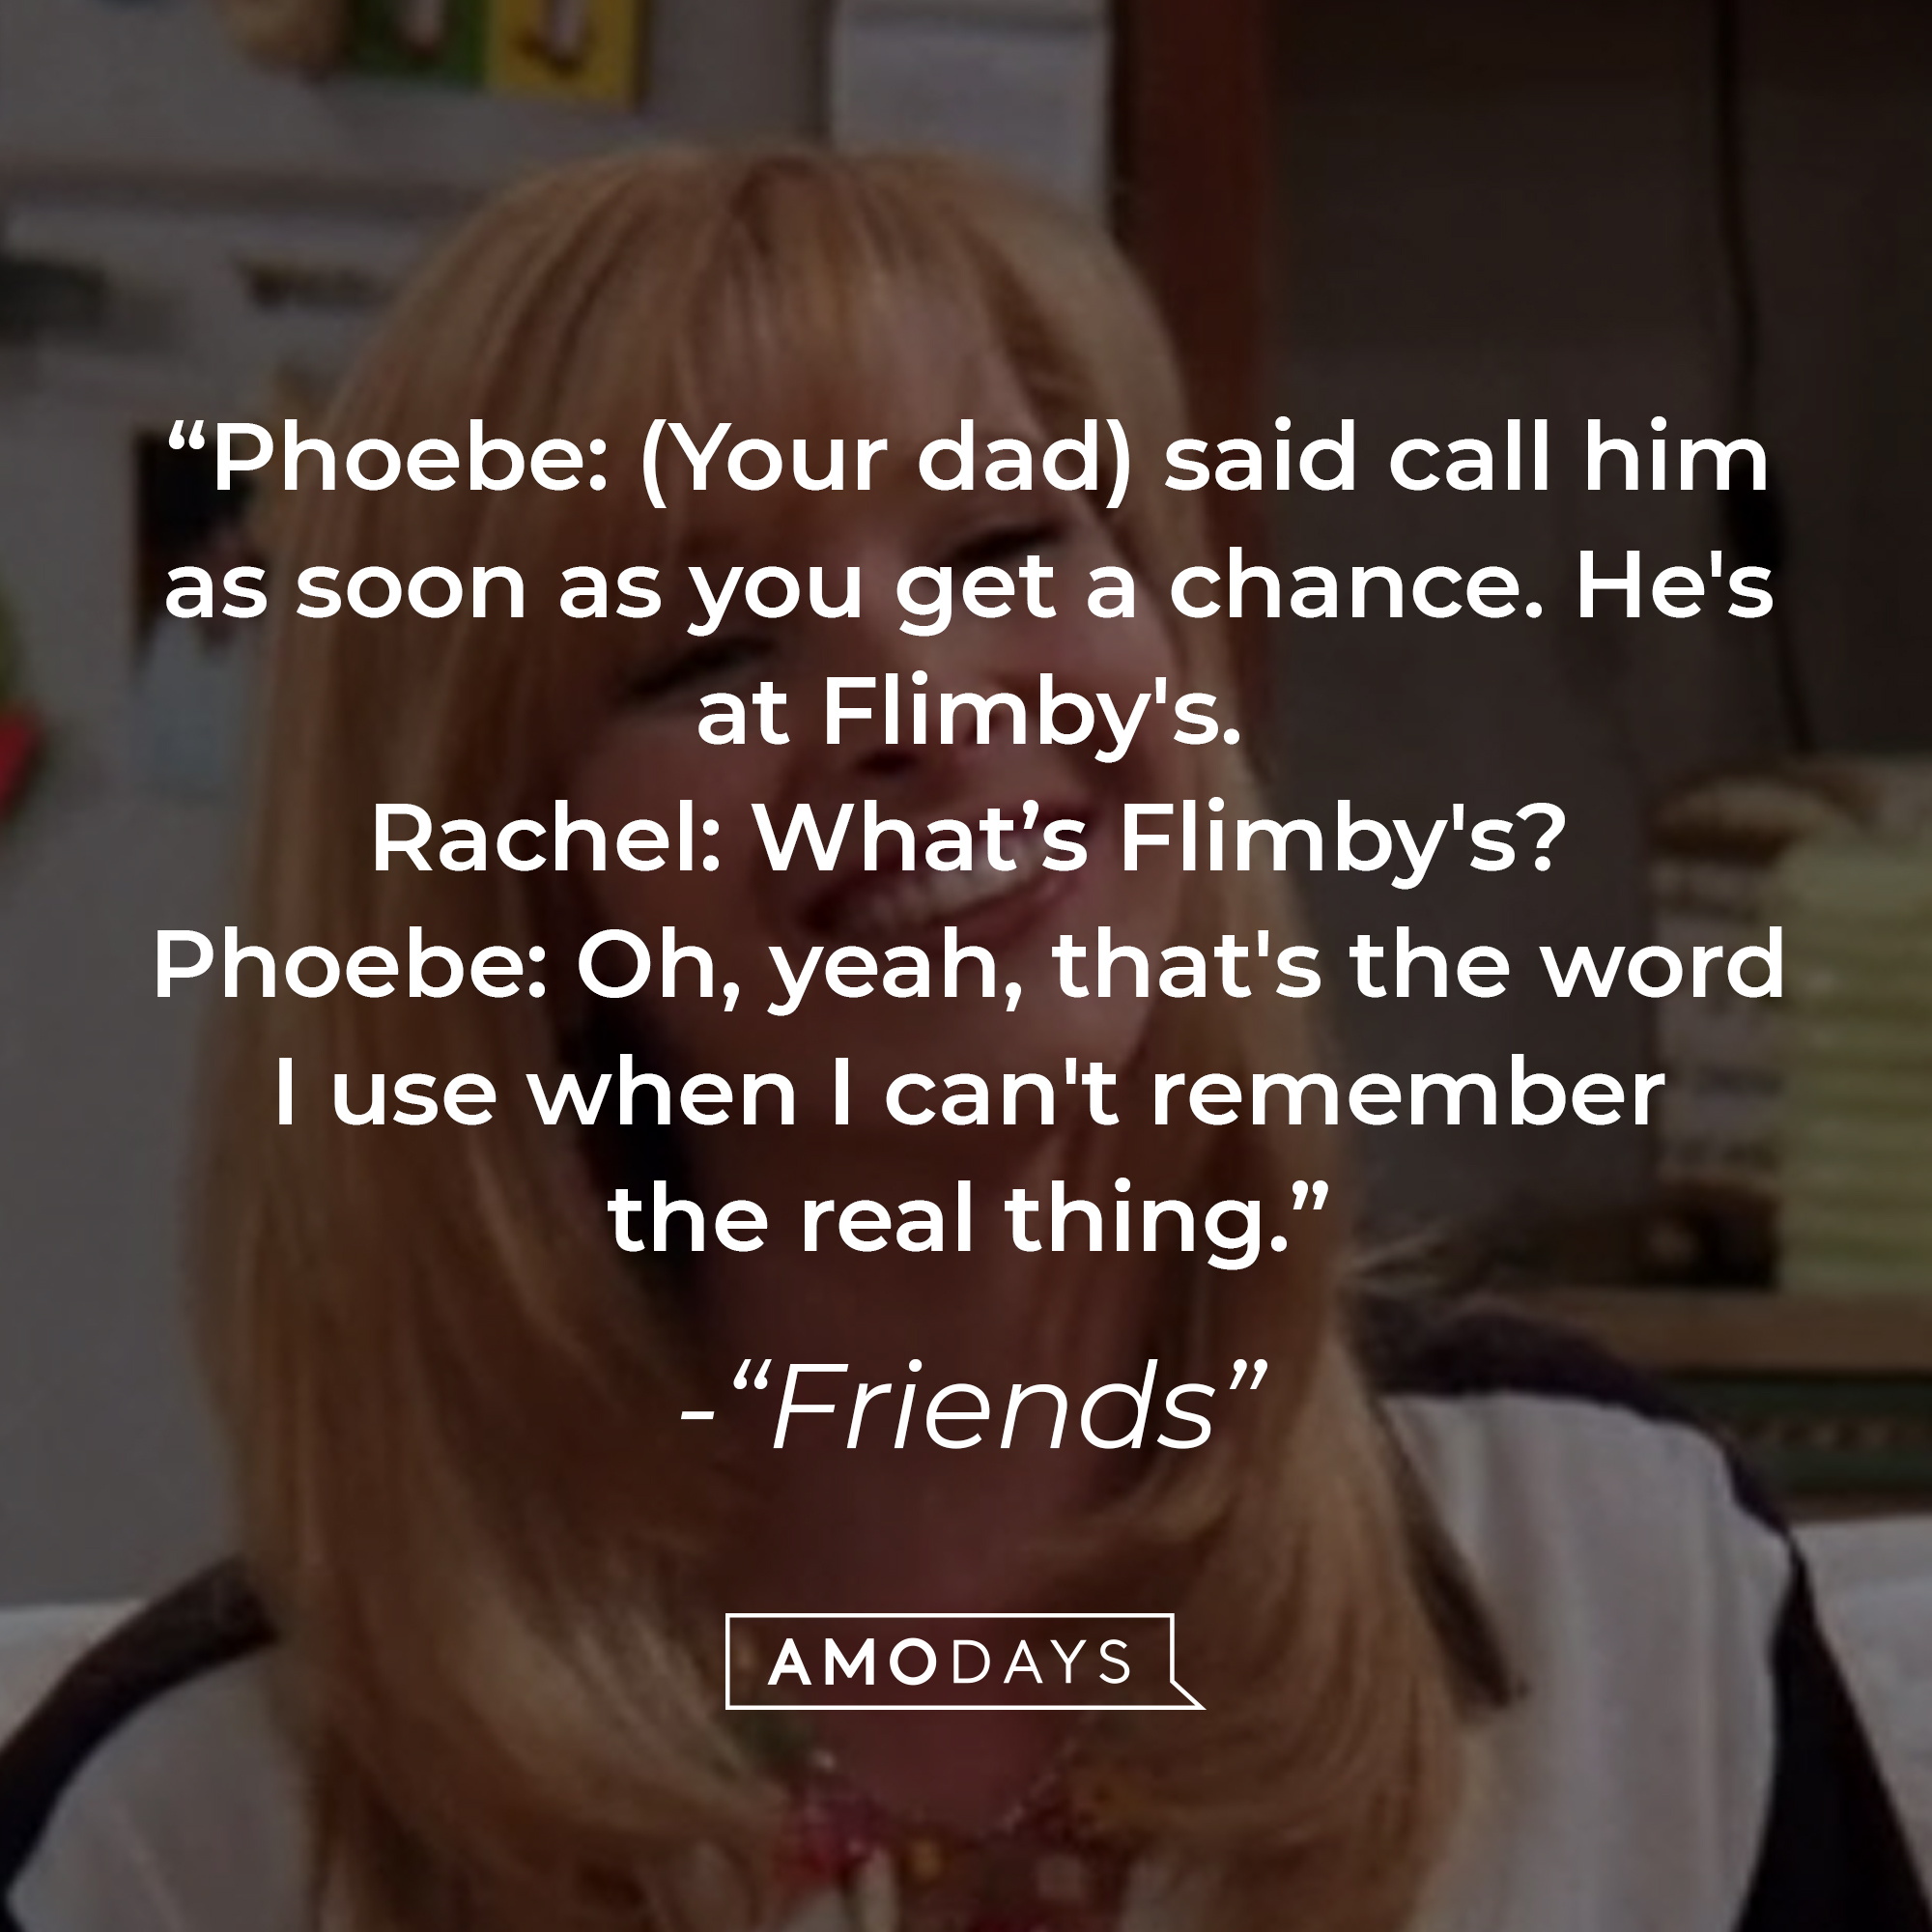 Quote from "Friends" TV show: "Phoebe: (Your dad) said call him as soon as you get a chance. He's at Flimby's. Rachel: What's Flimby's? Phoebe: Oh, yeah, that's the word I use when I can't remember the real thing." | Source: Facebook.com/friends.tv